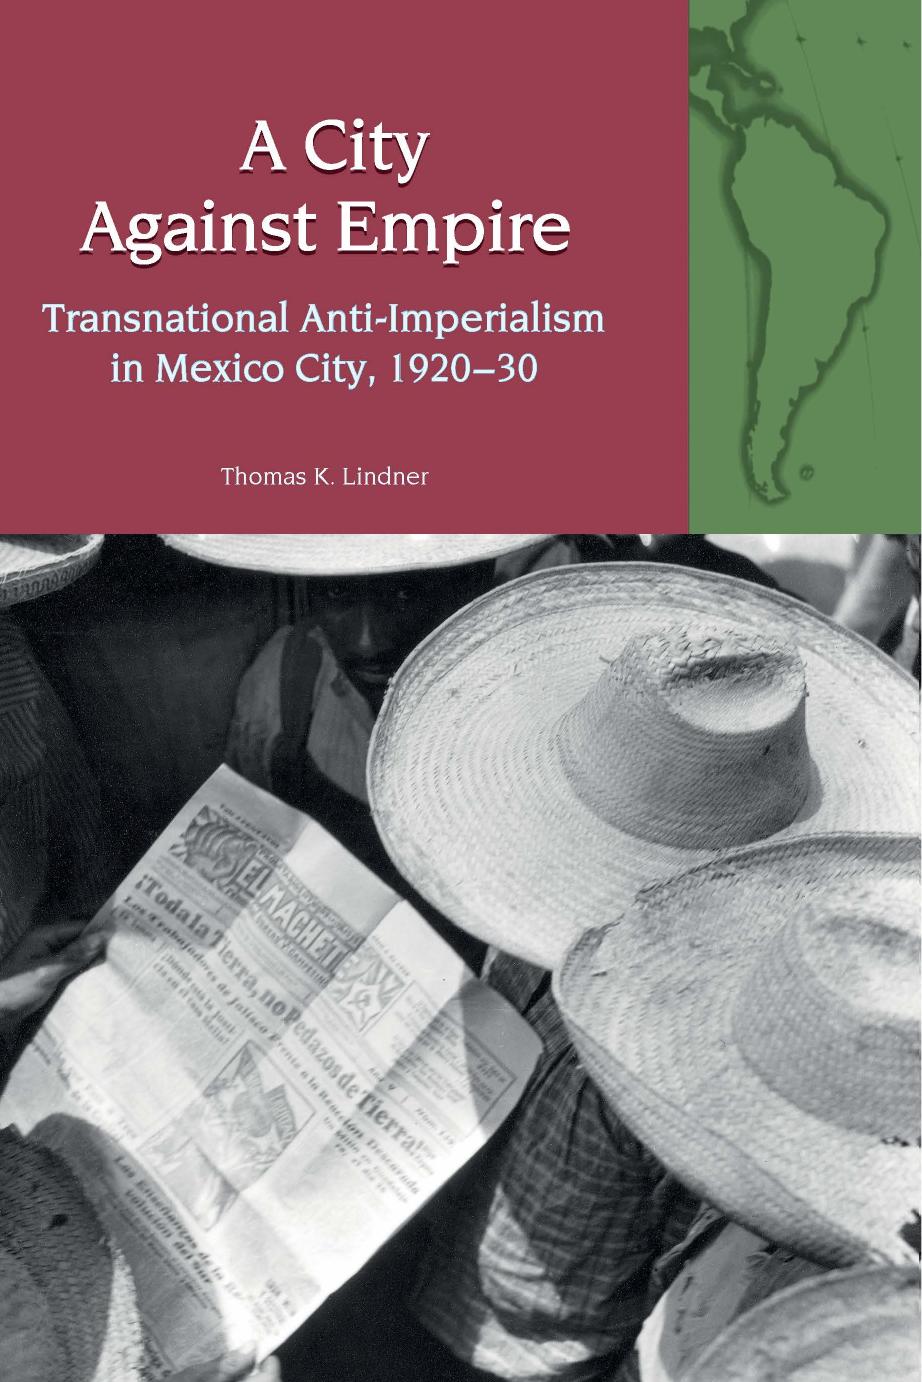 A City Against Empire: Transnational Anti-Imperialism in Mexico City, 1920-30 by Thomas K. Lindner